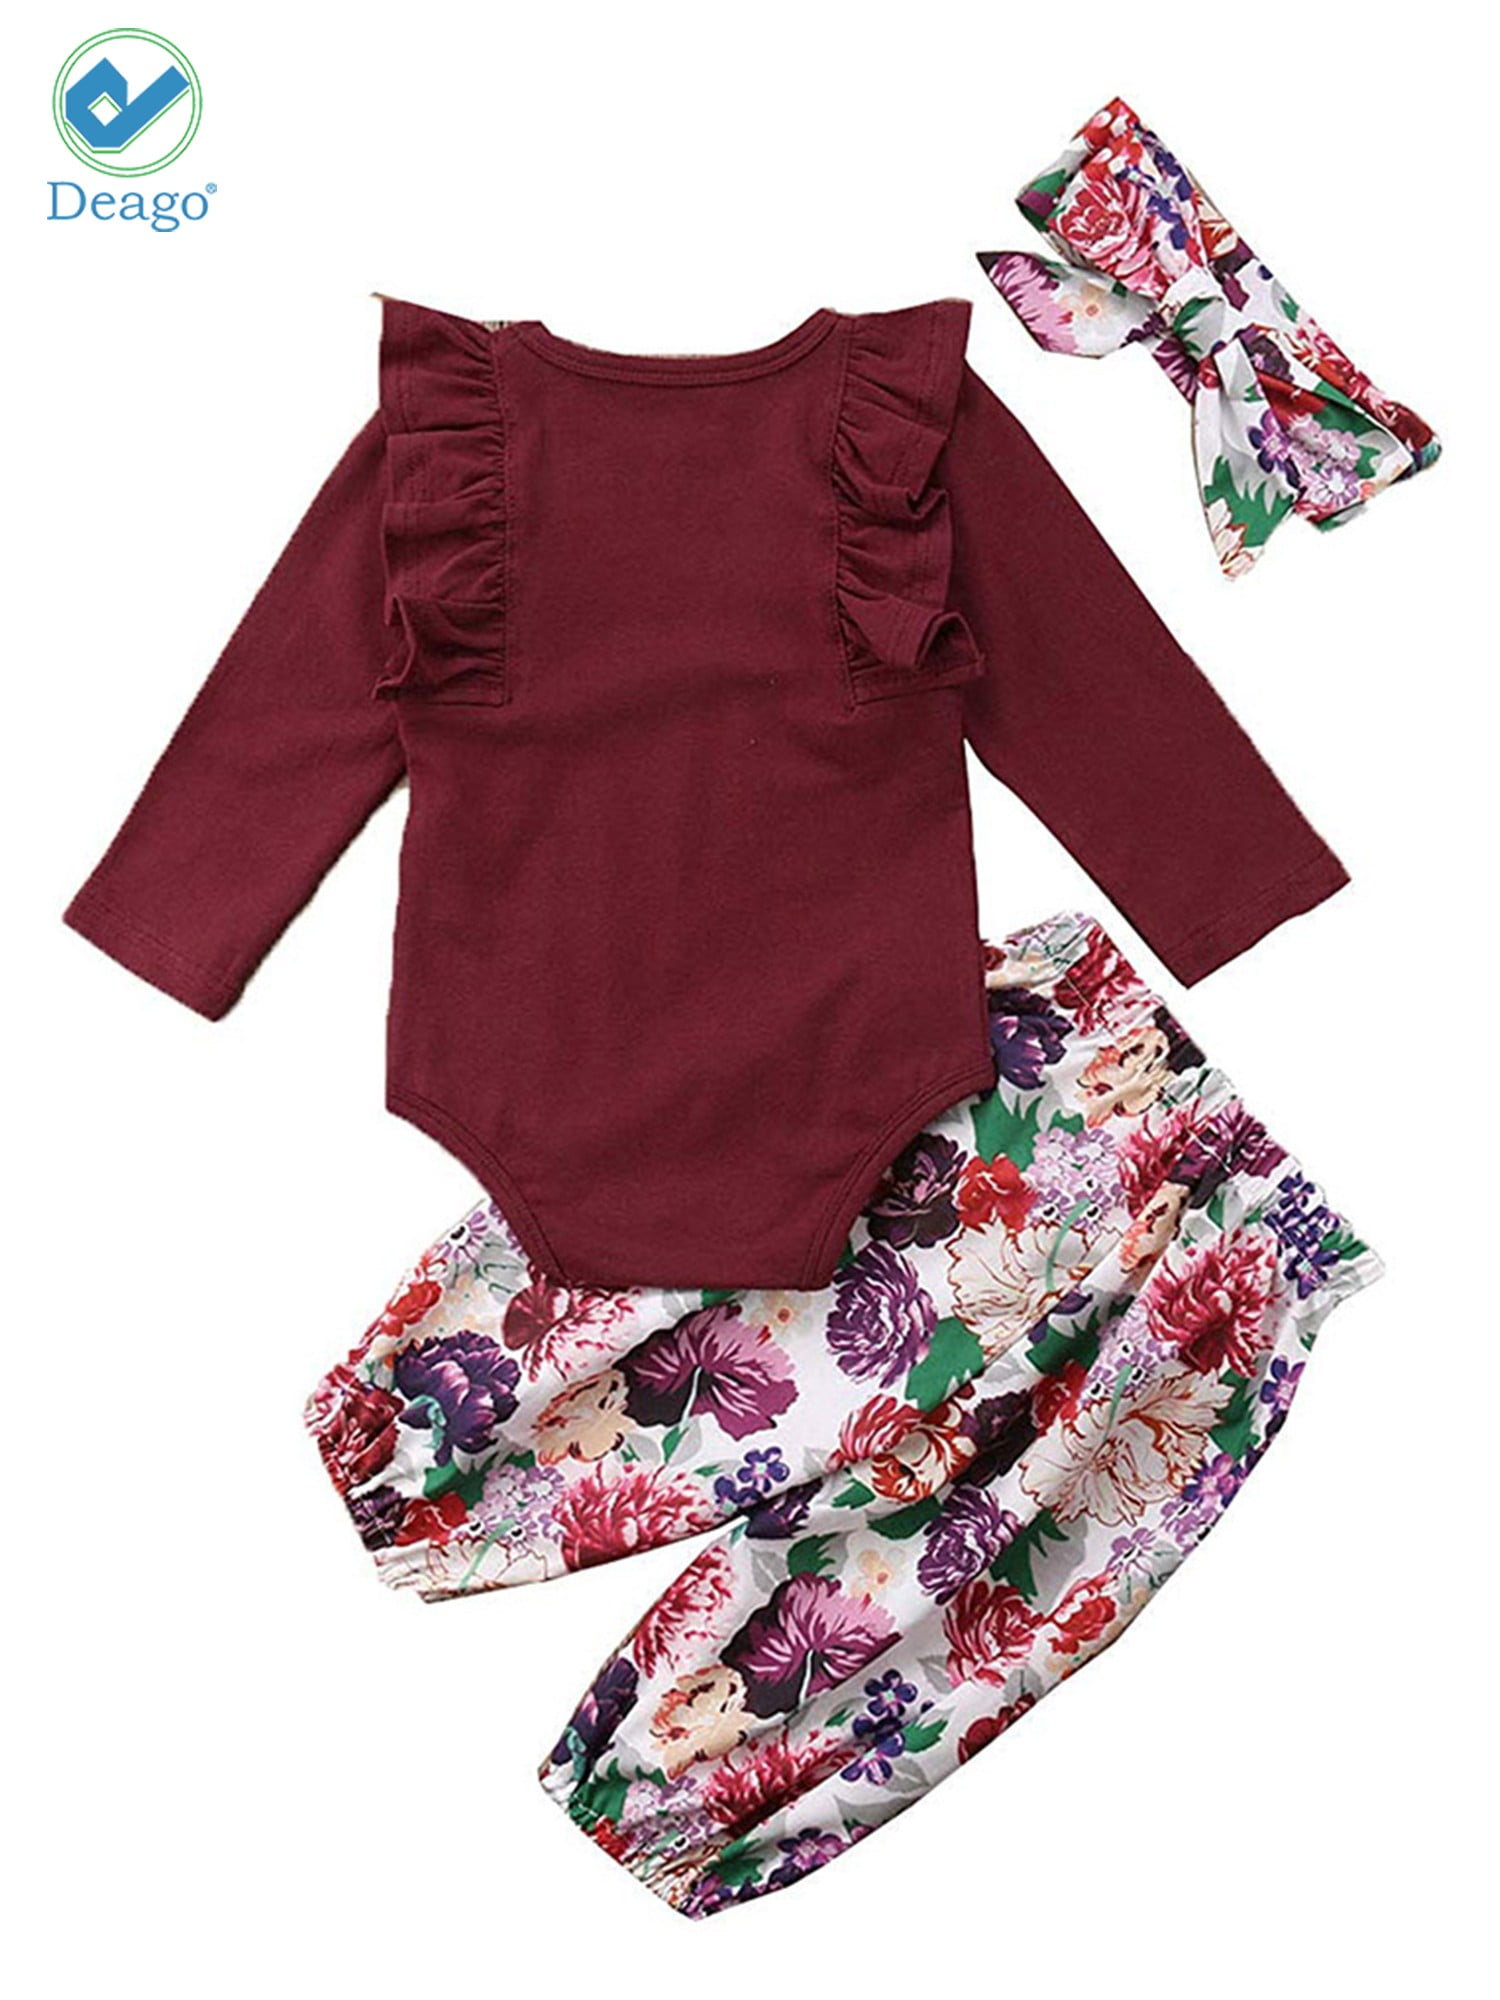 Dookingup Toddler Kids Baby Girl Clothes Ruffle Sleeve T-Shirt Tops+Floral Long Pants Leggings Outfits Set with Handband